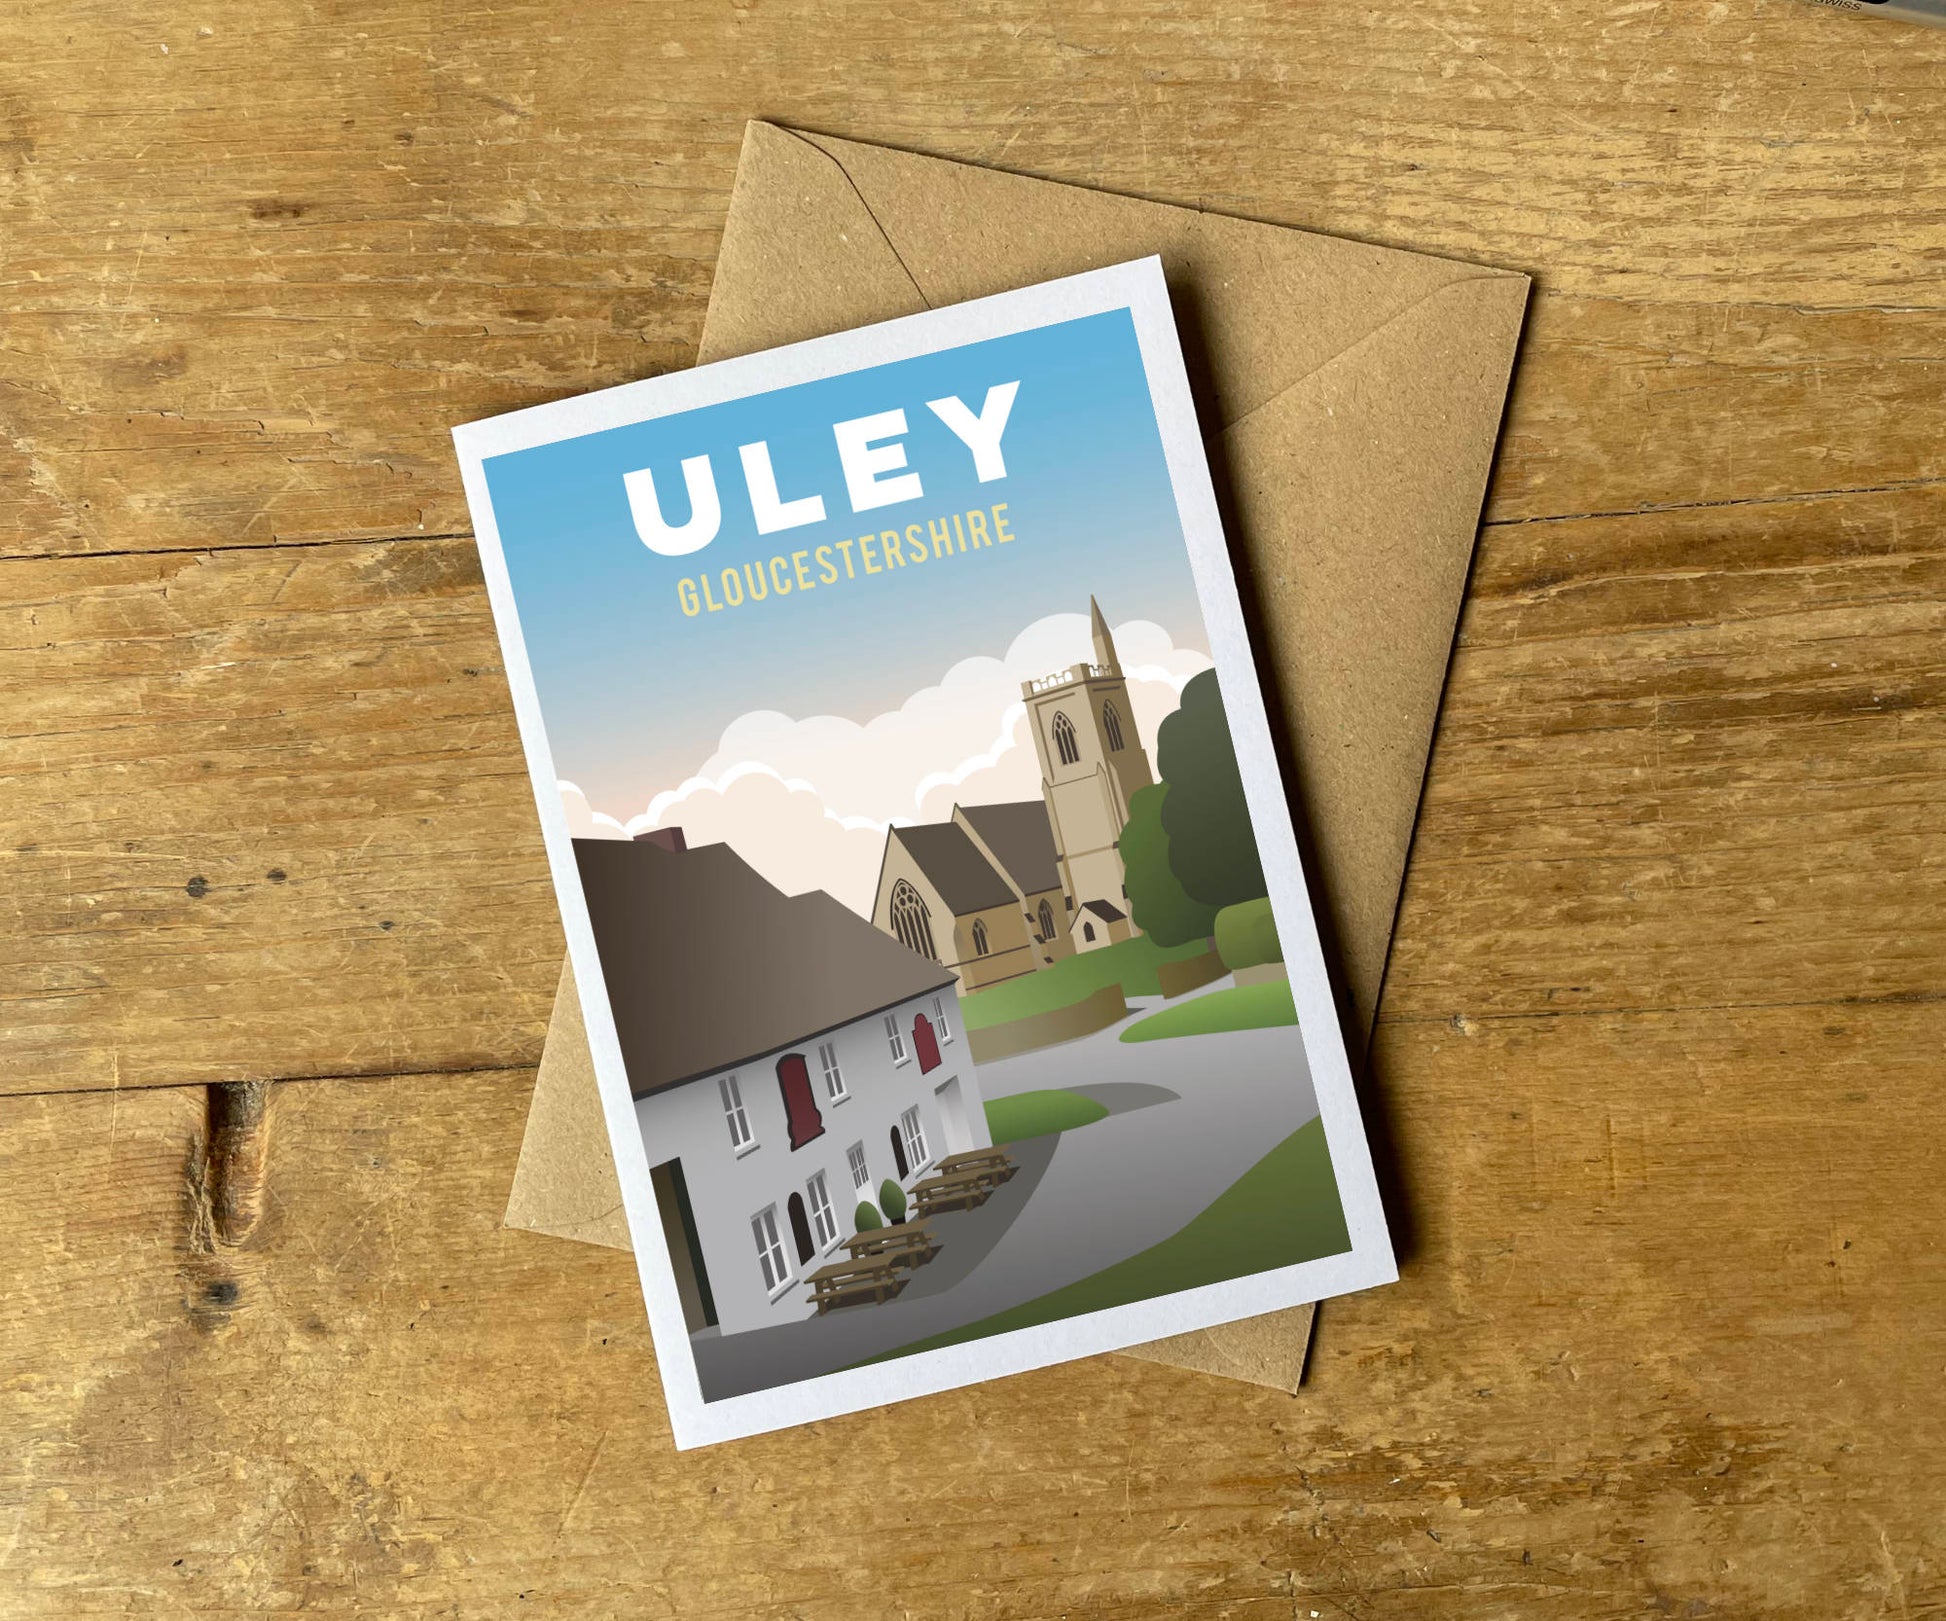 Uley Greeting Card Vintage Style